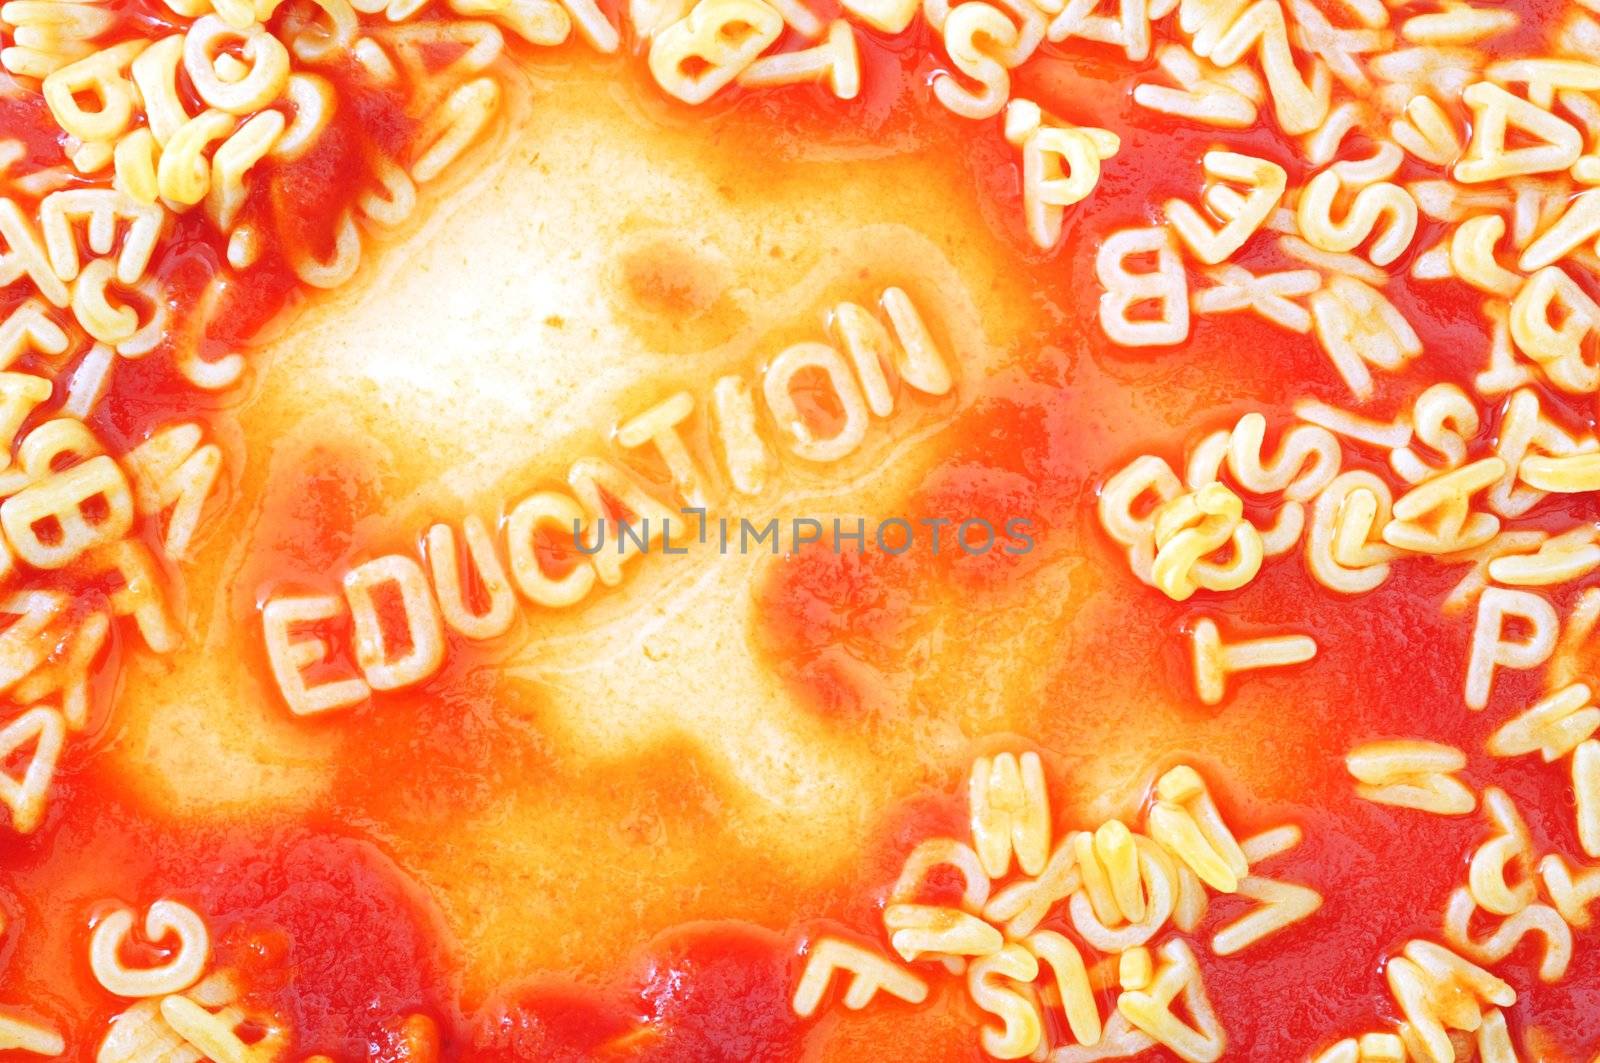 school education concept with red pasta alphabet